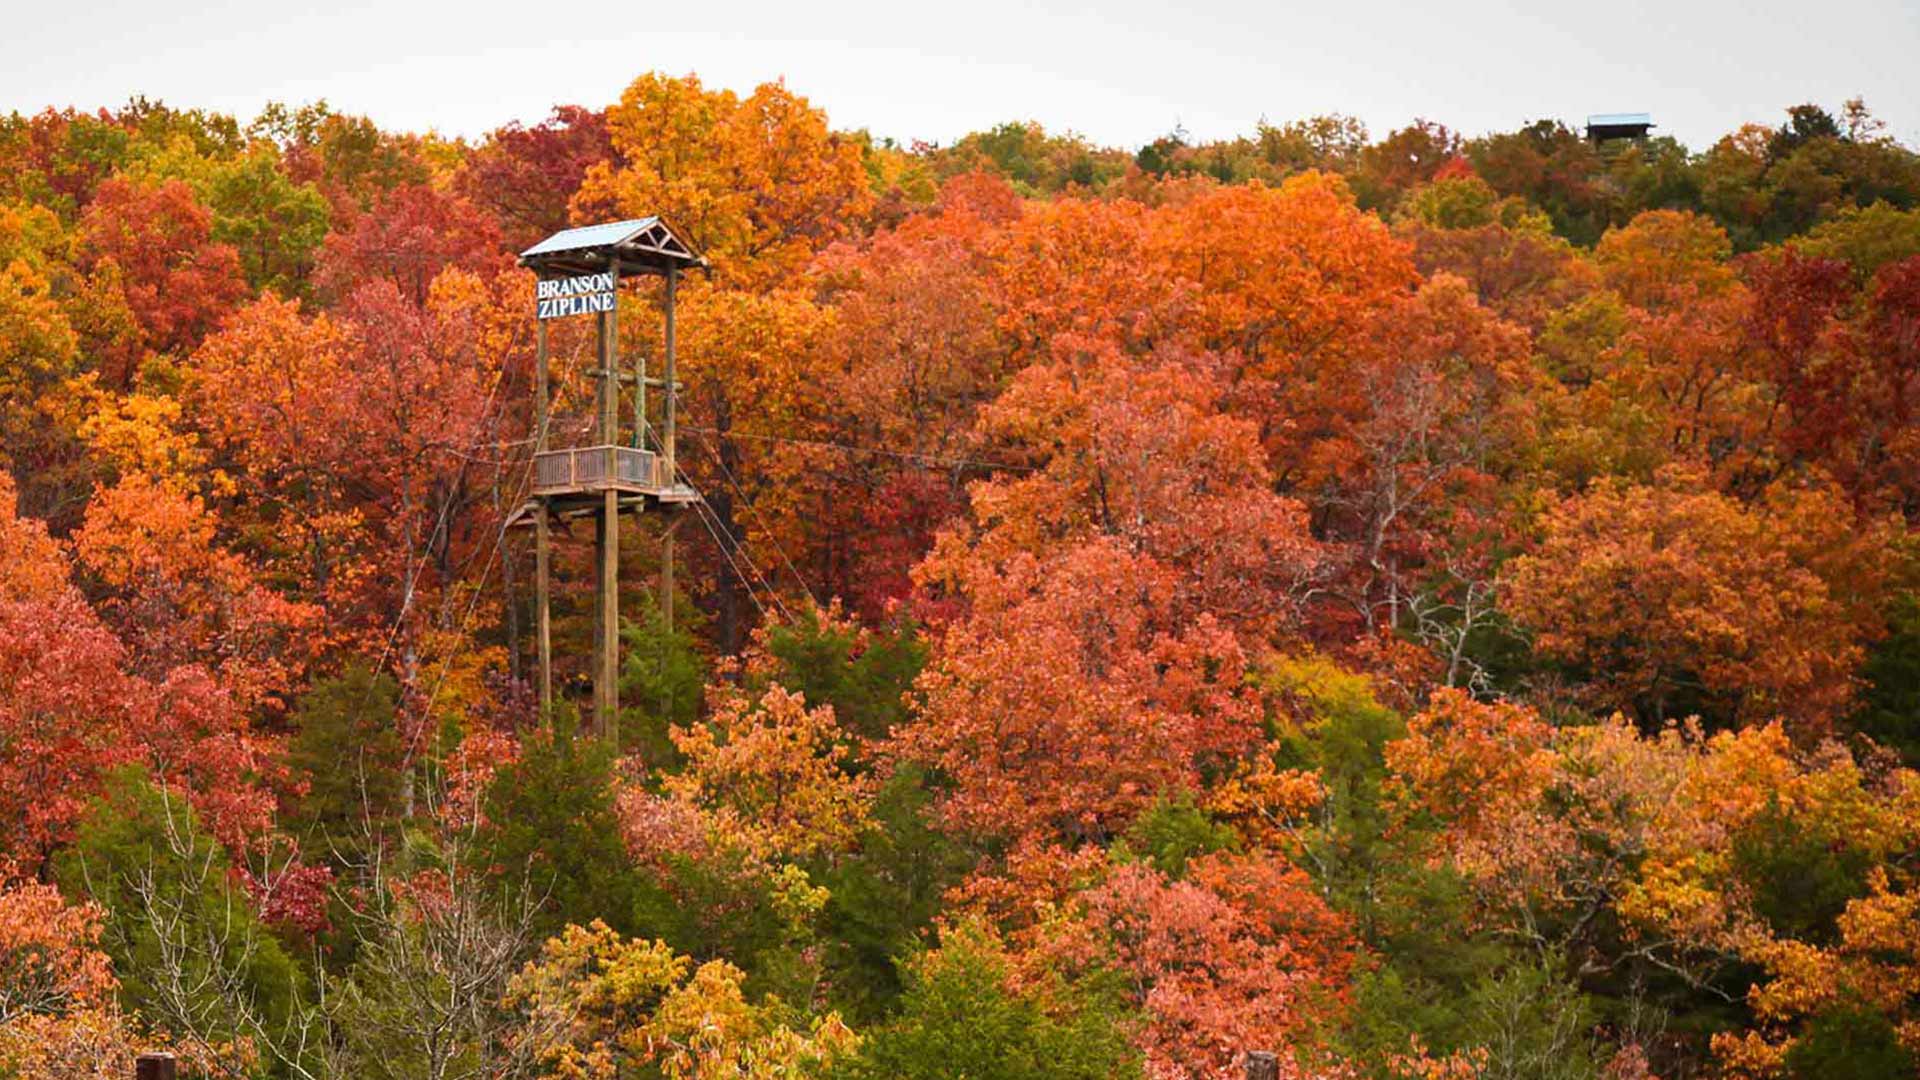 A tower at Branson Zipline surrounded by trees with orange leaves